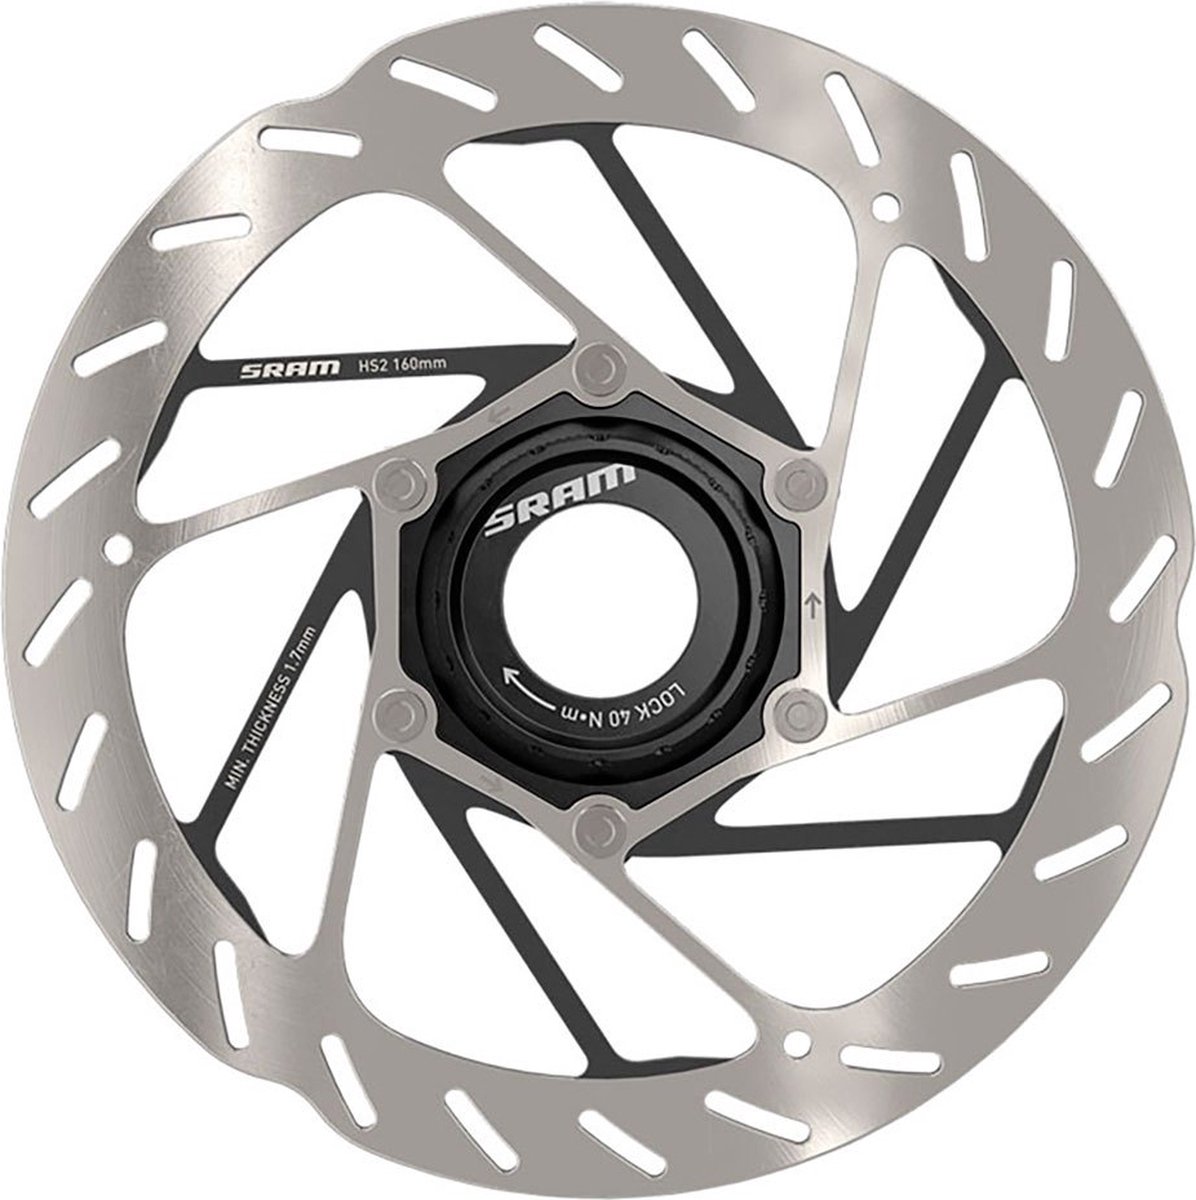 Sram remschijf HS2 Cl rounded 220mm zilver